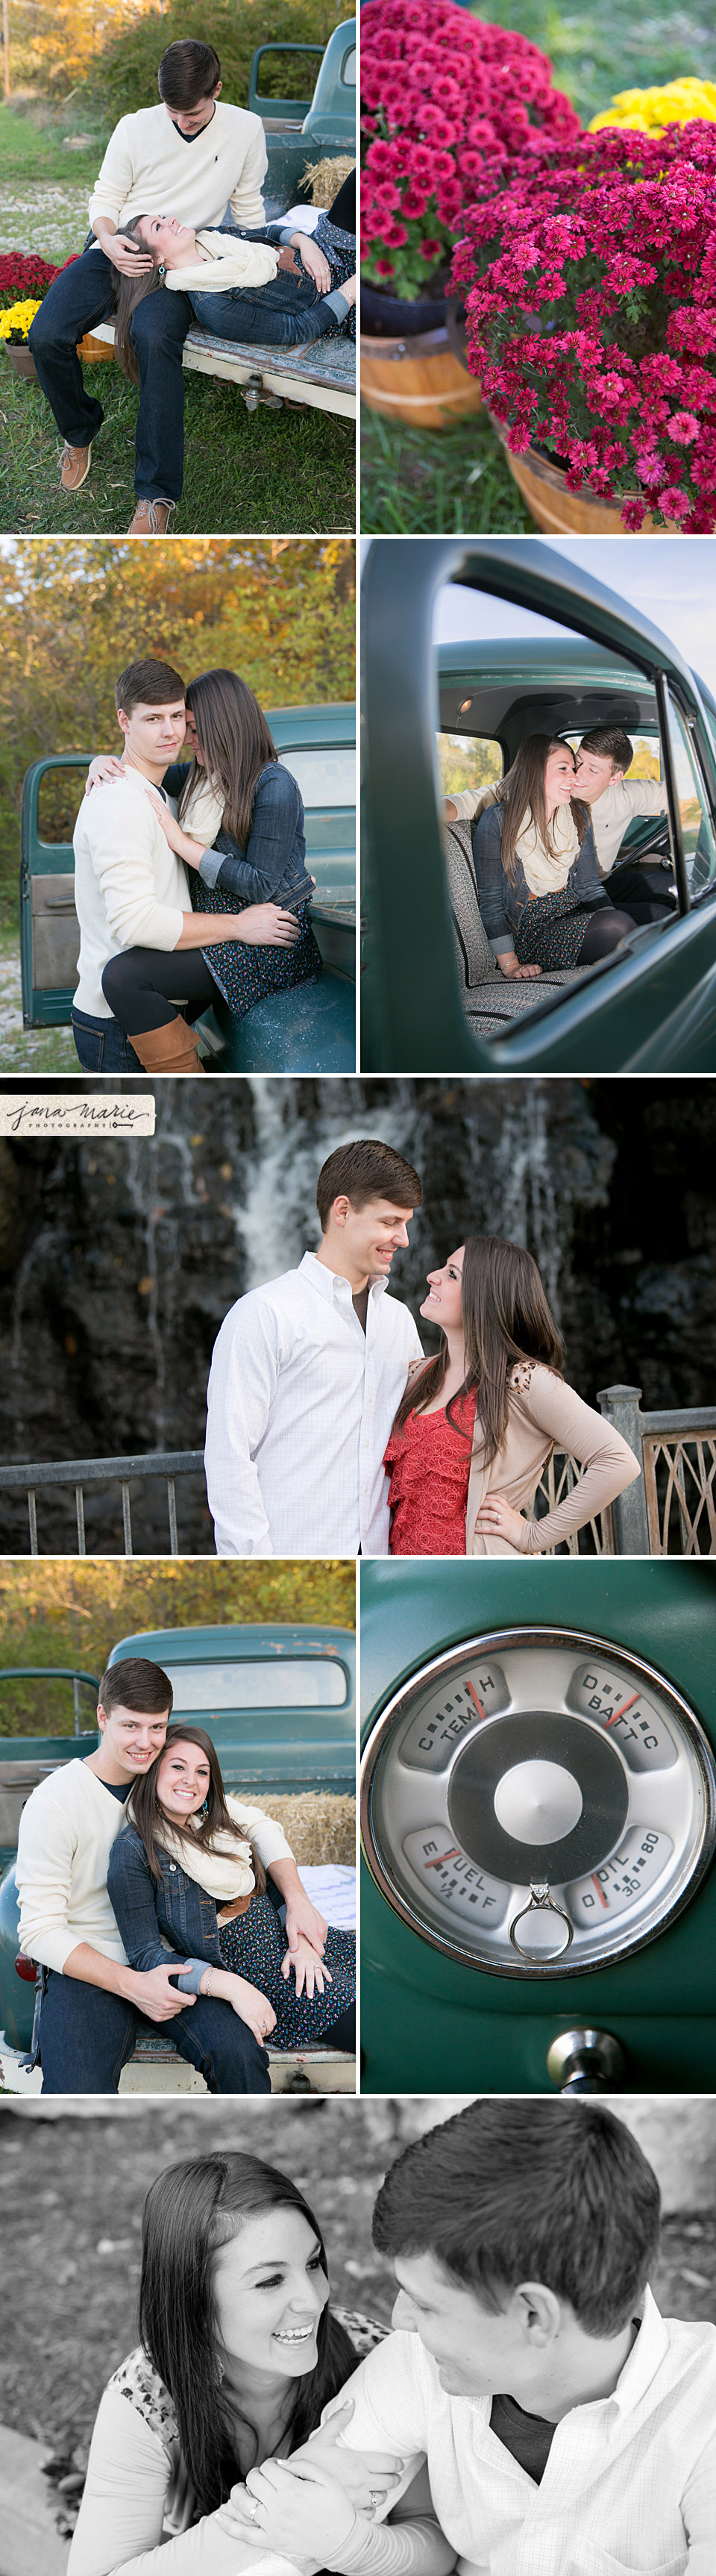 Fall flowers, Waterfall photos, Jana Marie Photography, laughter, Beloved moments, Kiss